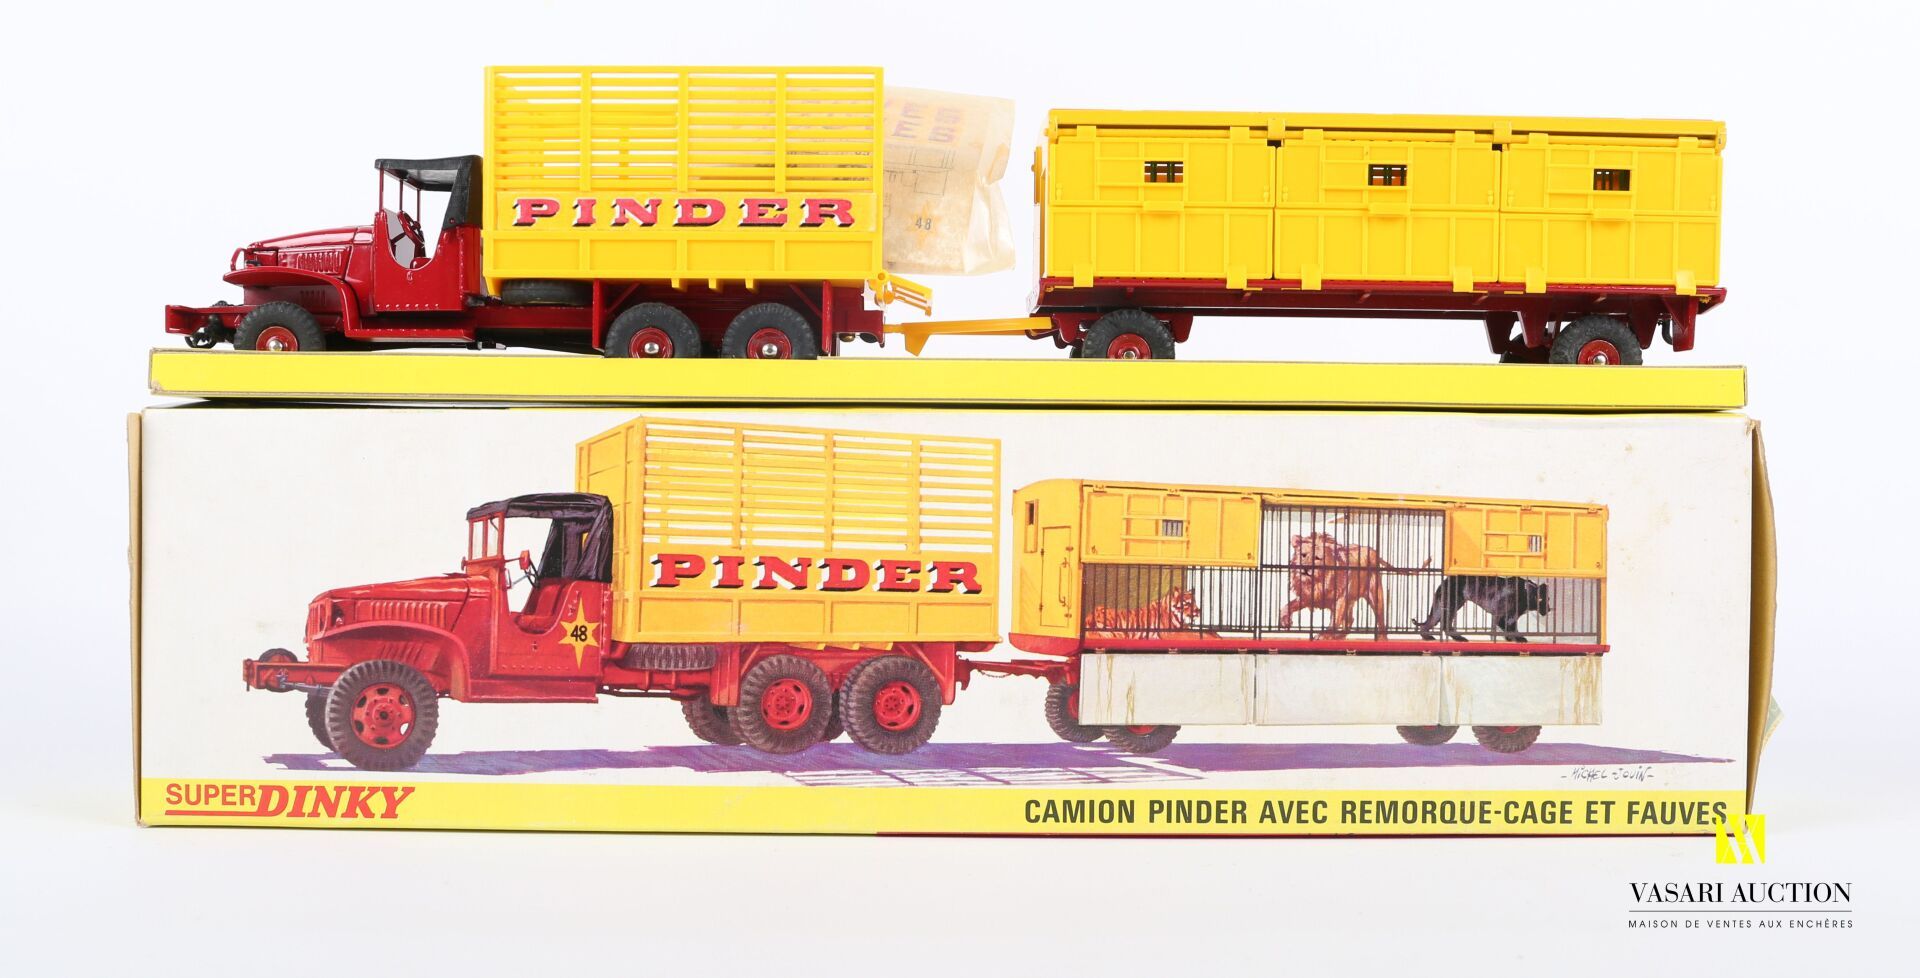 Null SUPER DINKY MECCANO (EN)

G.M.C Pinder truck with cage trailer and animals &hellip;